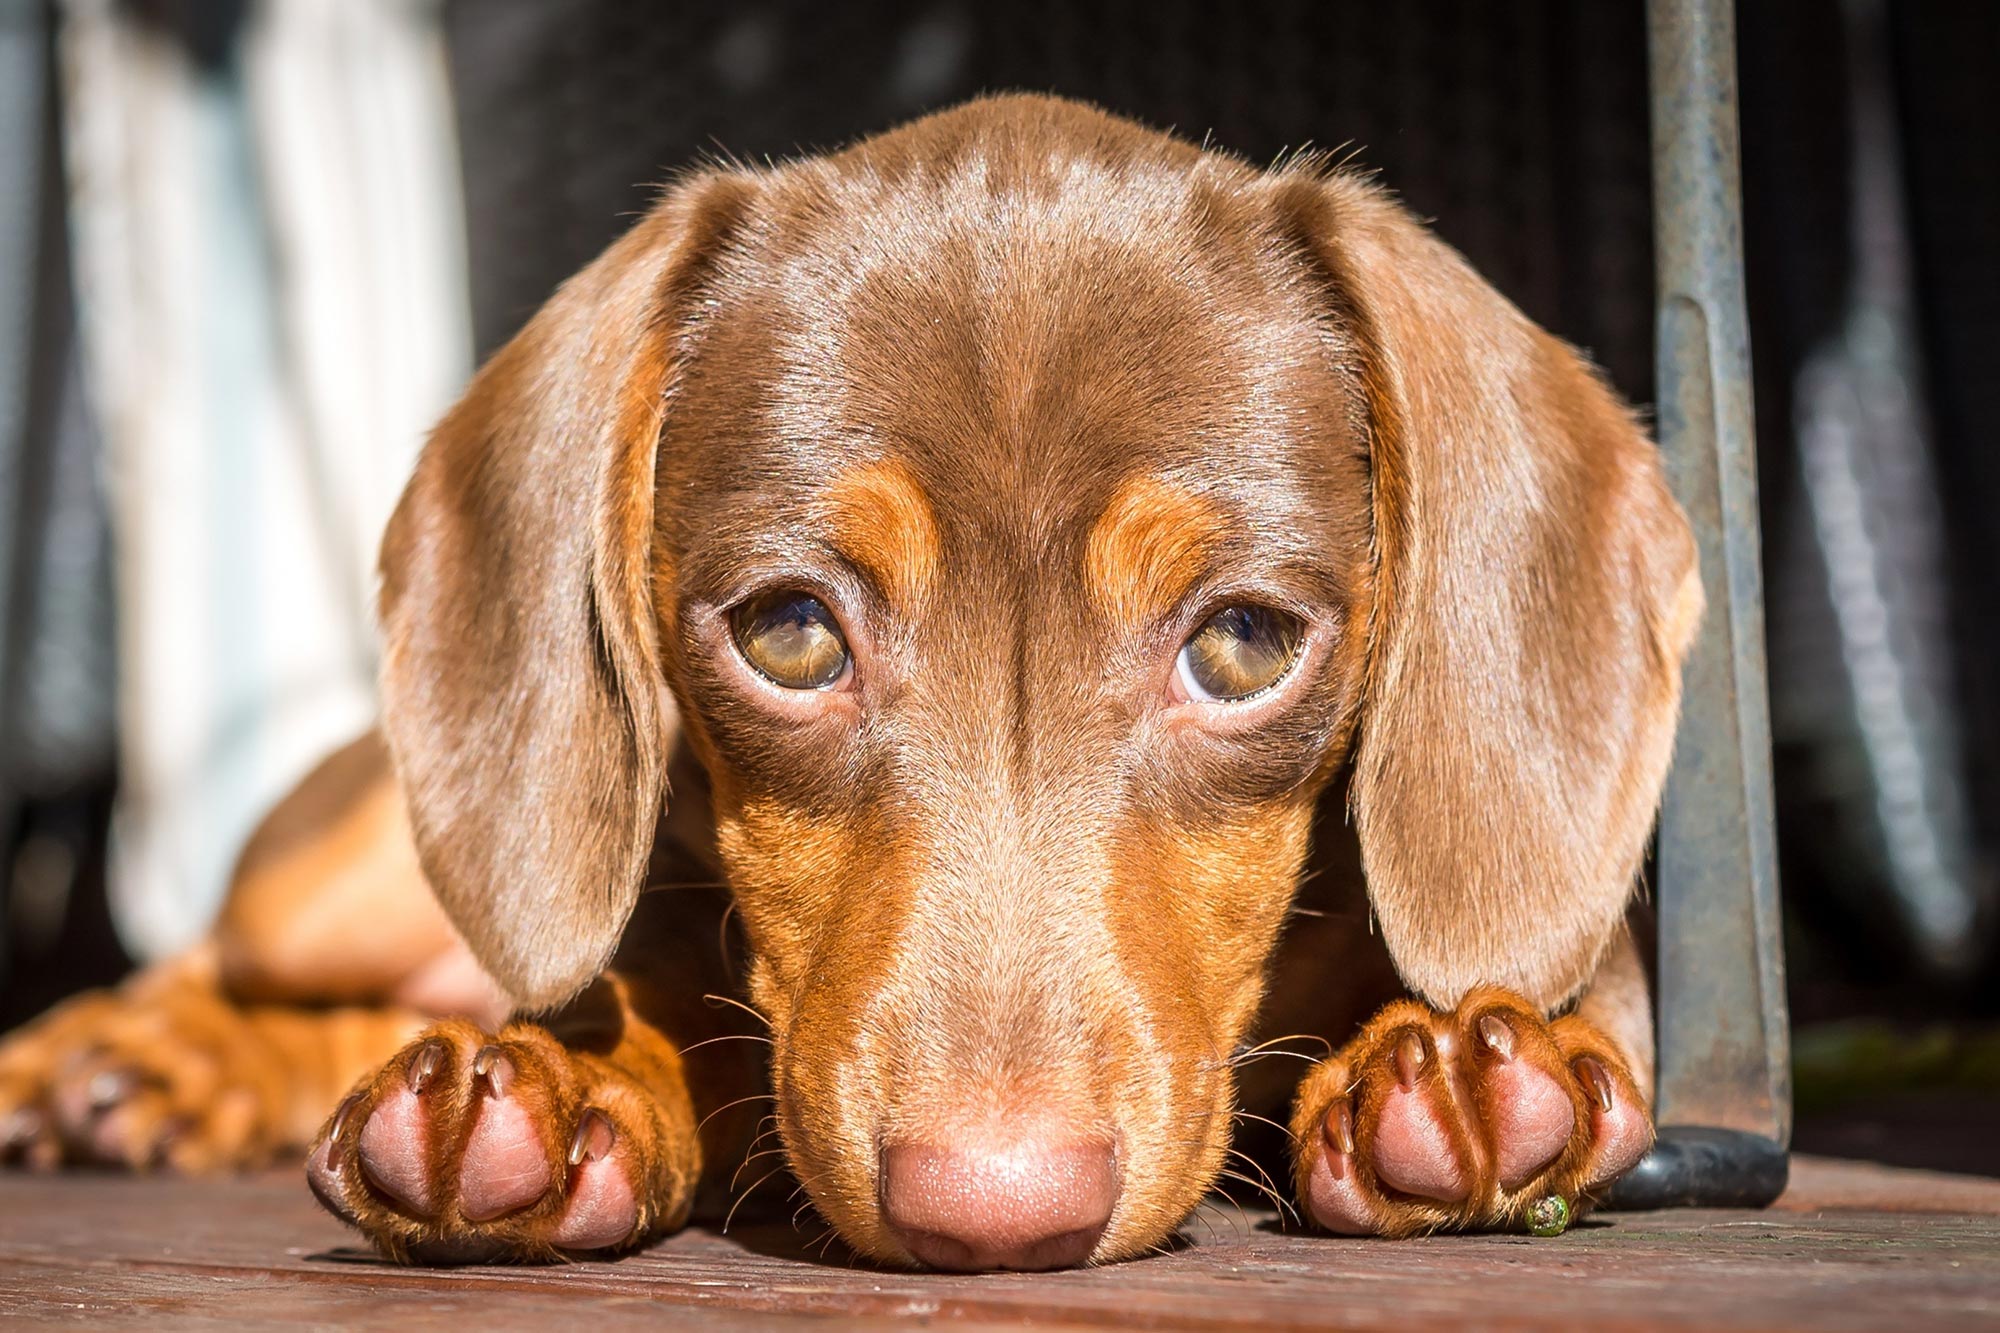 Revealing the Science Behind Those Irresistible Puppy-Dog Eyes thumbnail